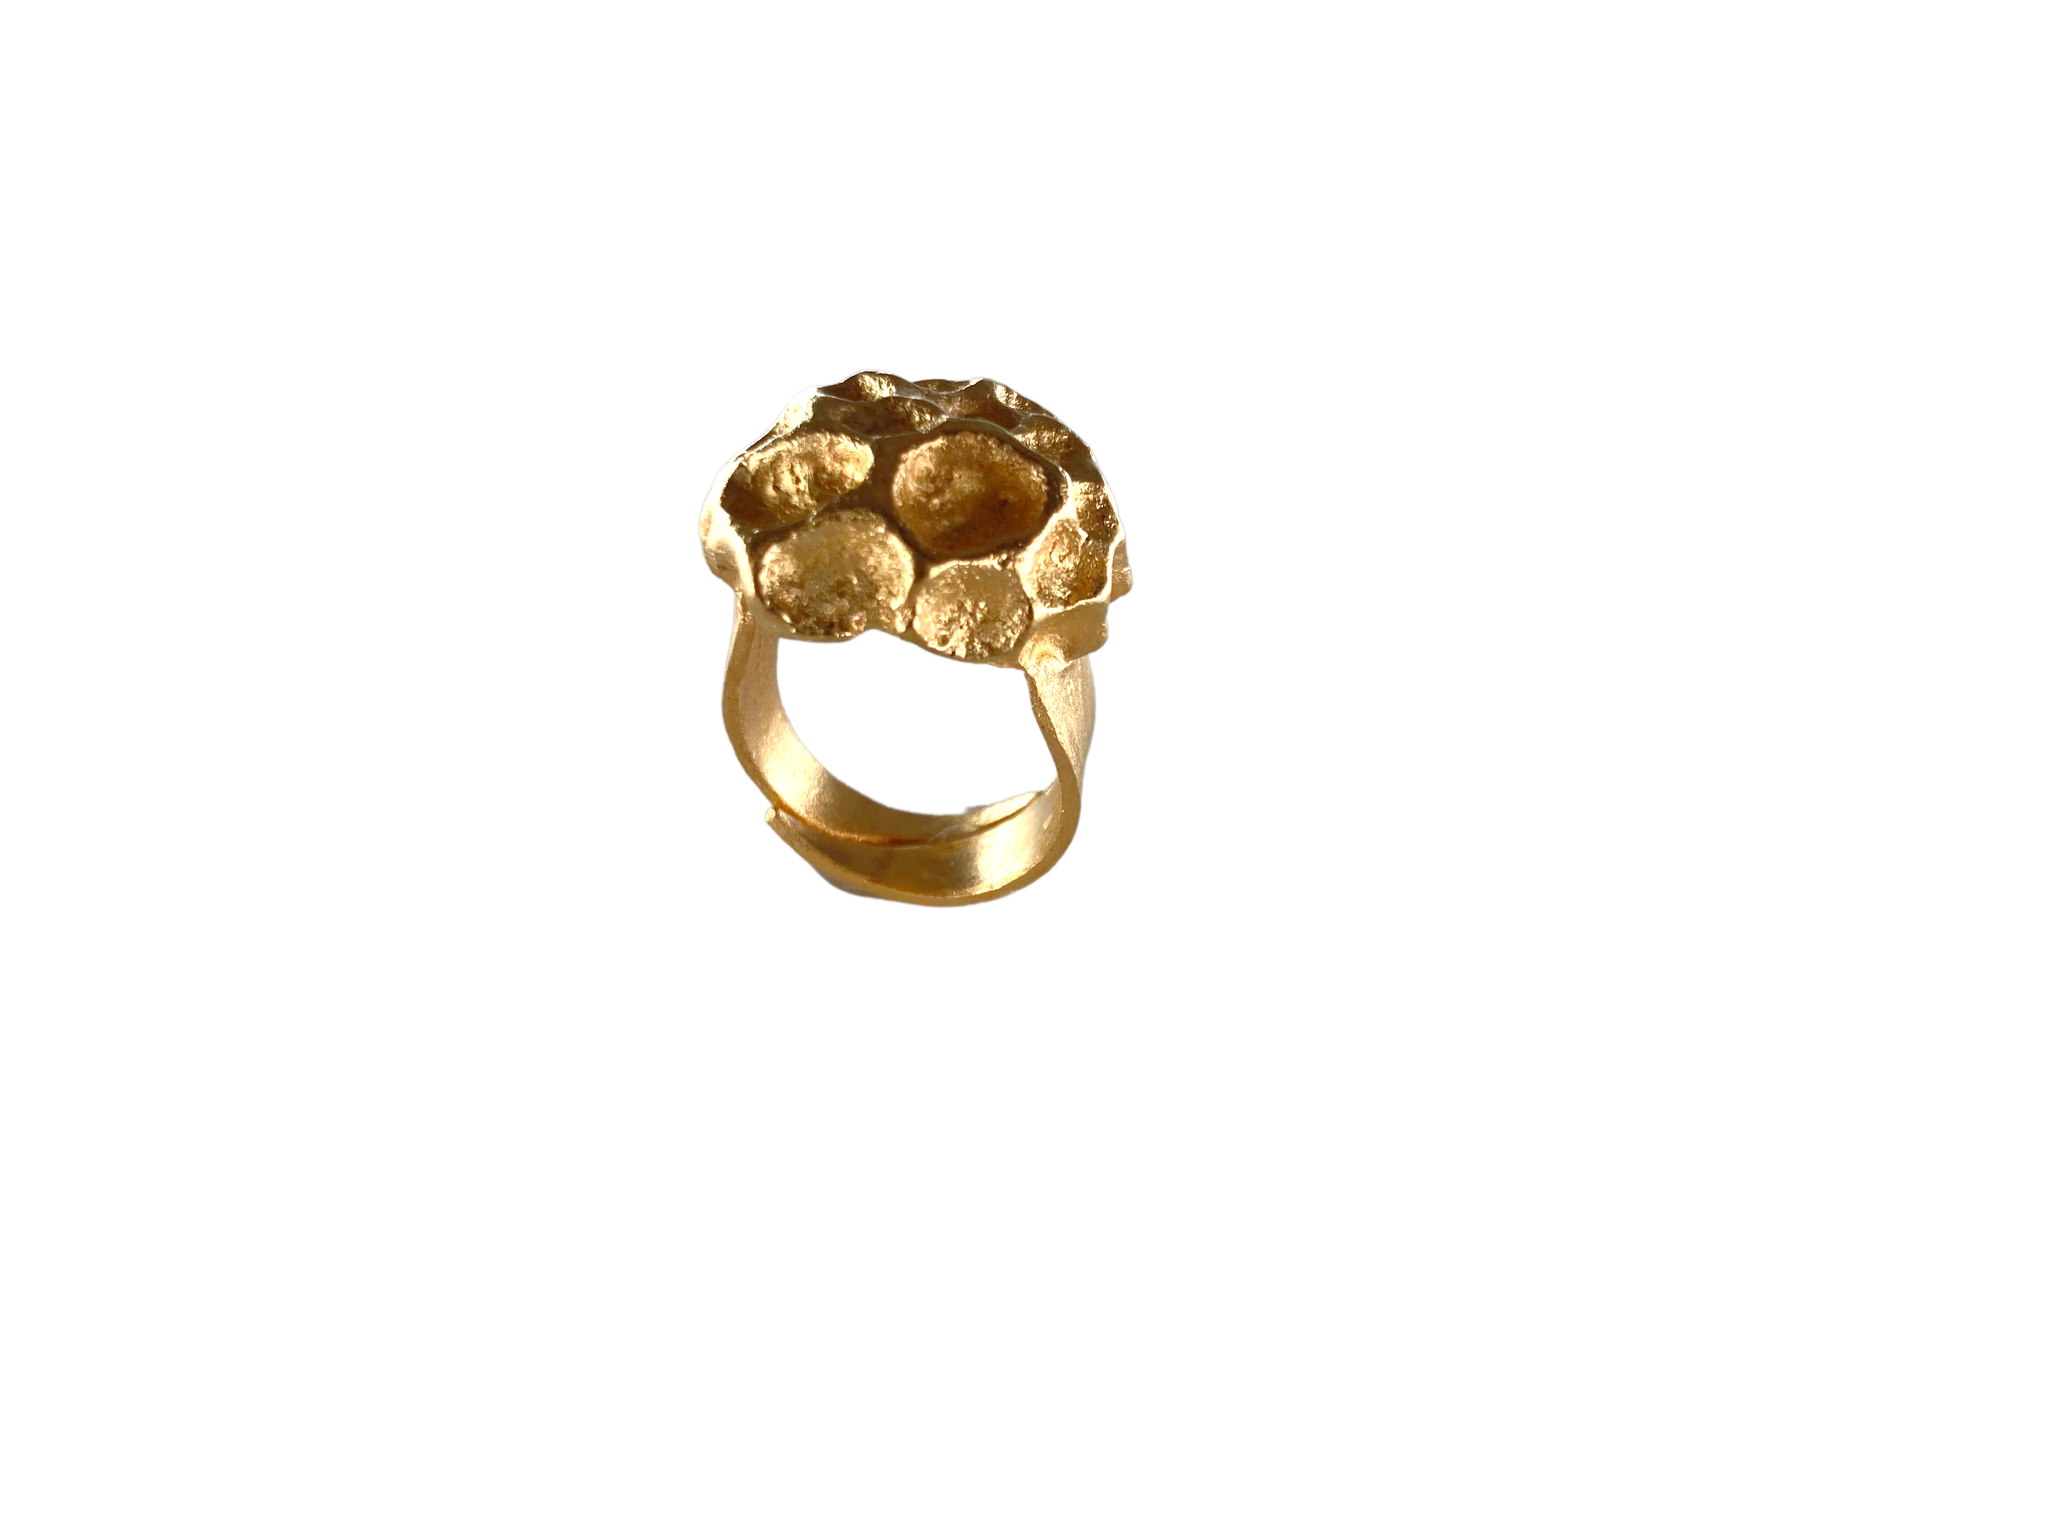 The Coral Stone Ring